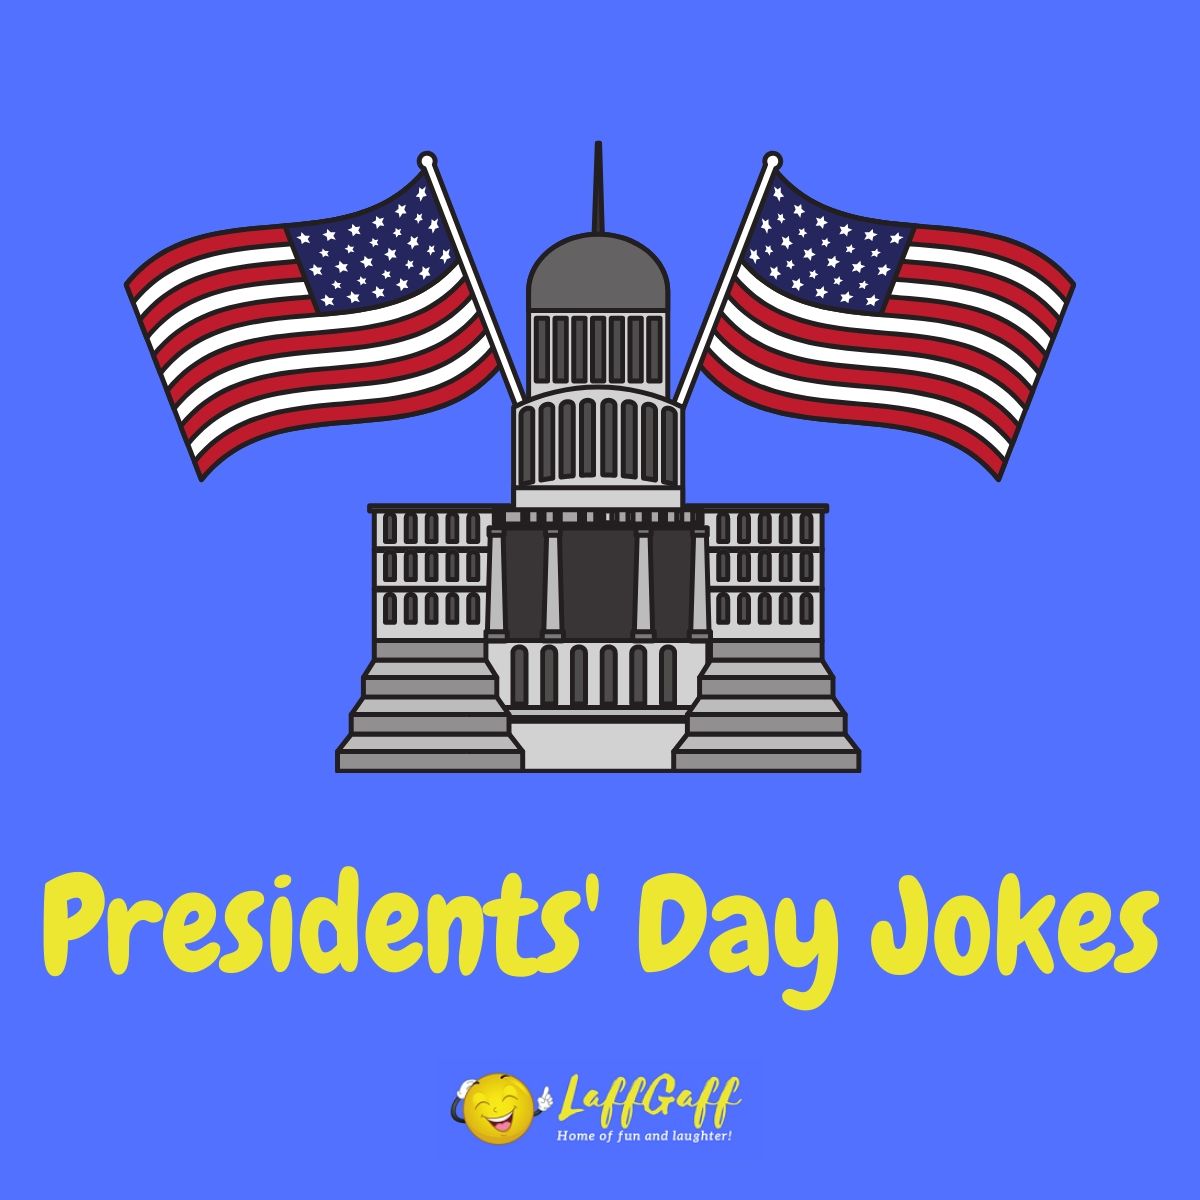 Featured image for a page of funny Presidents' Day jokes.